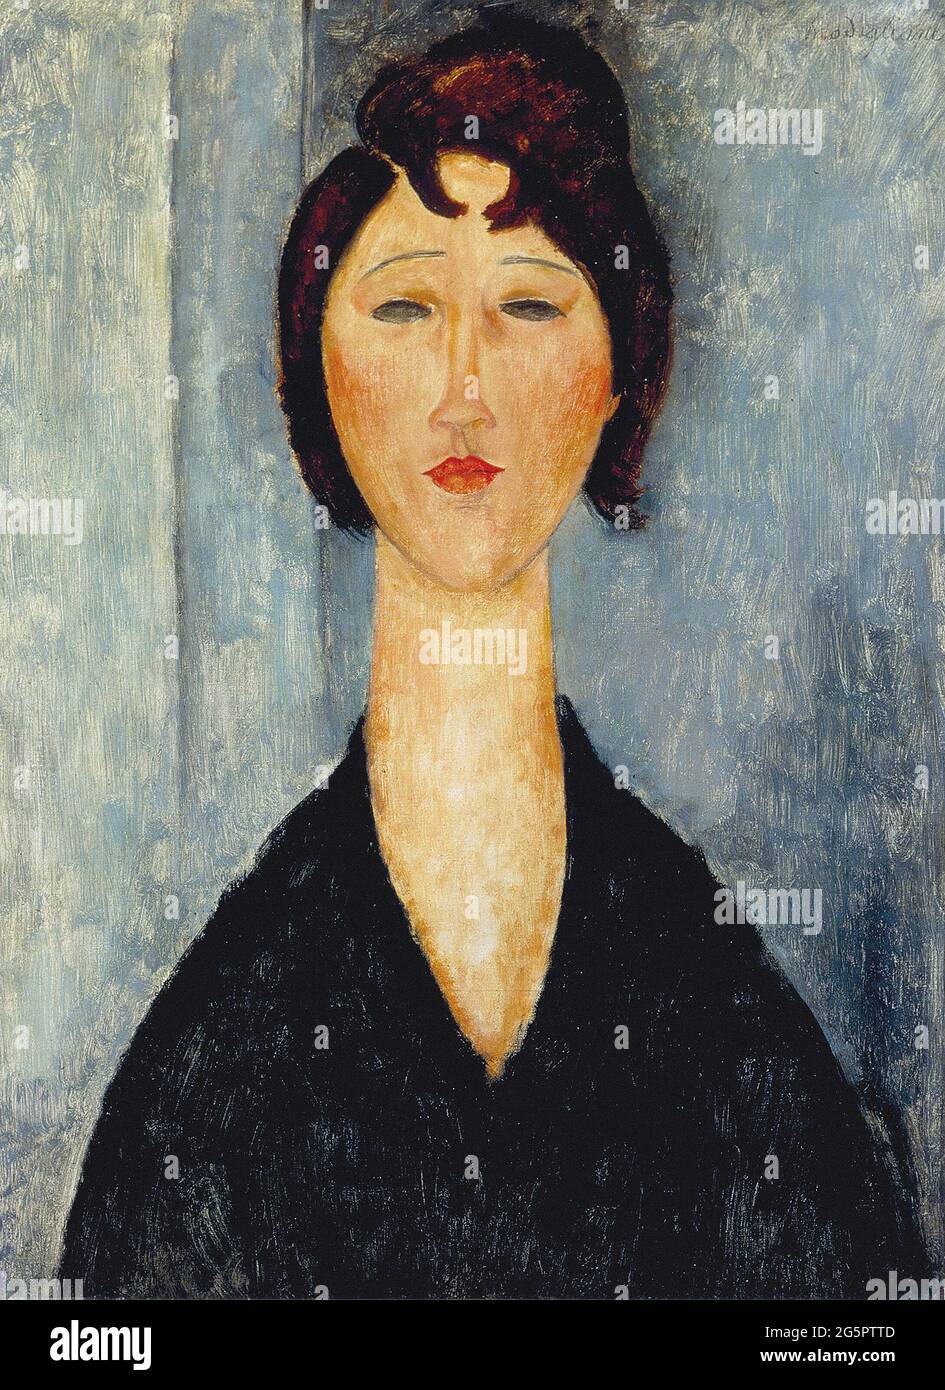 Portrait Of Young Woman by Amedeo Modigliani 1918. New Orleans Museum Of Art, USA Stock Photo